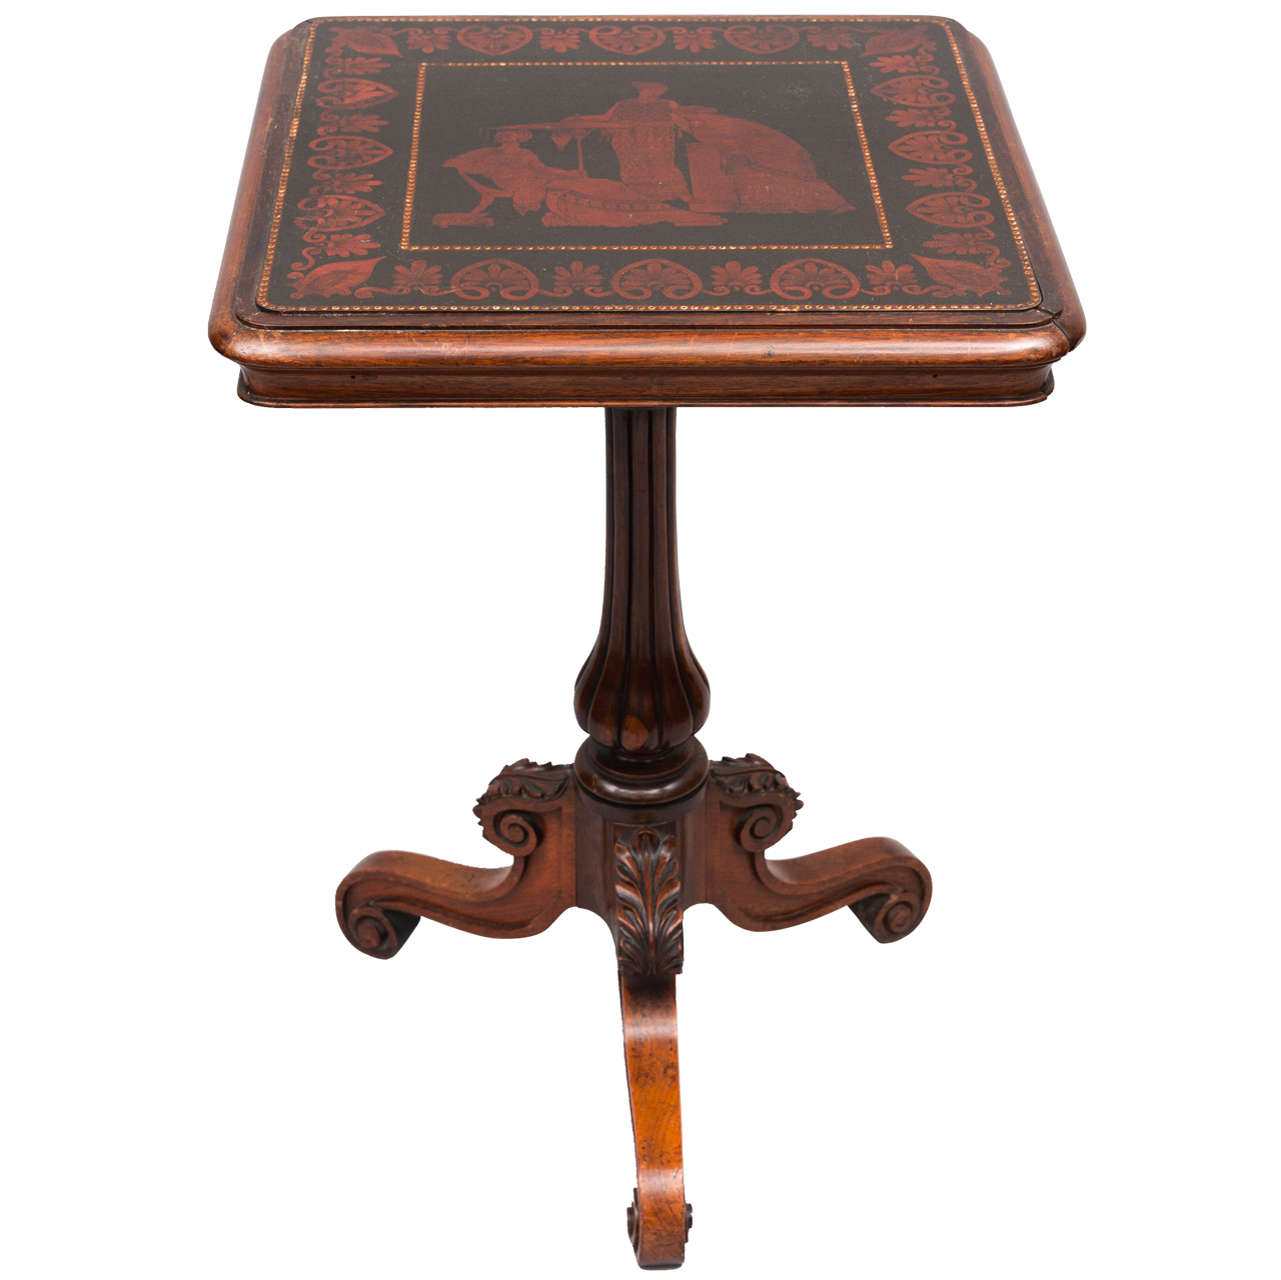 Late Regency Rosewood Decorated Occasional Table